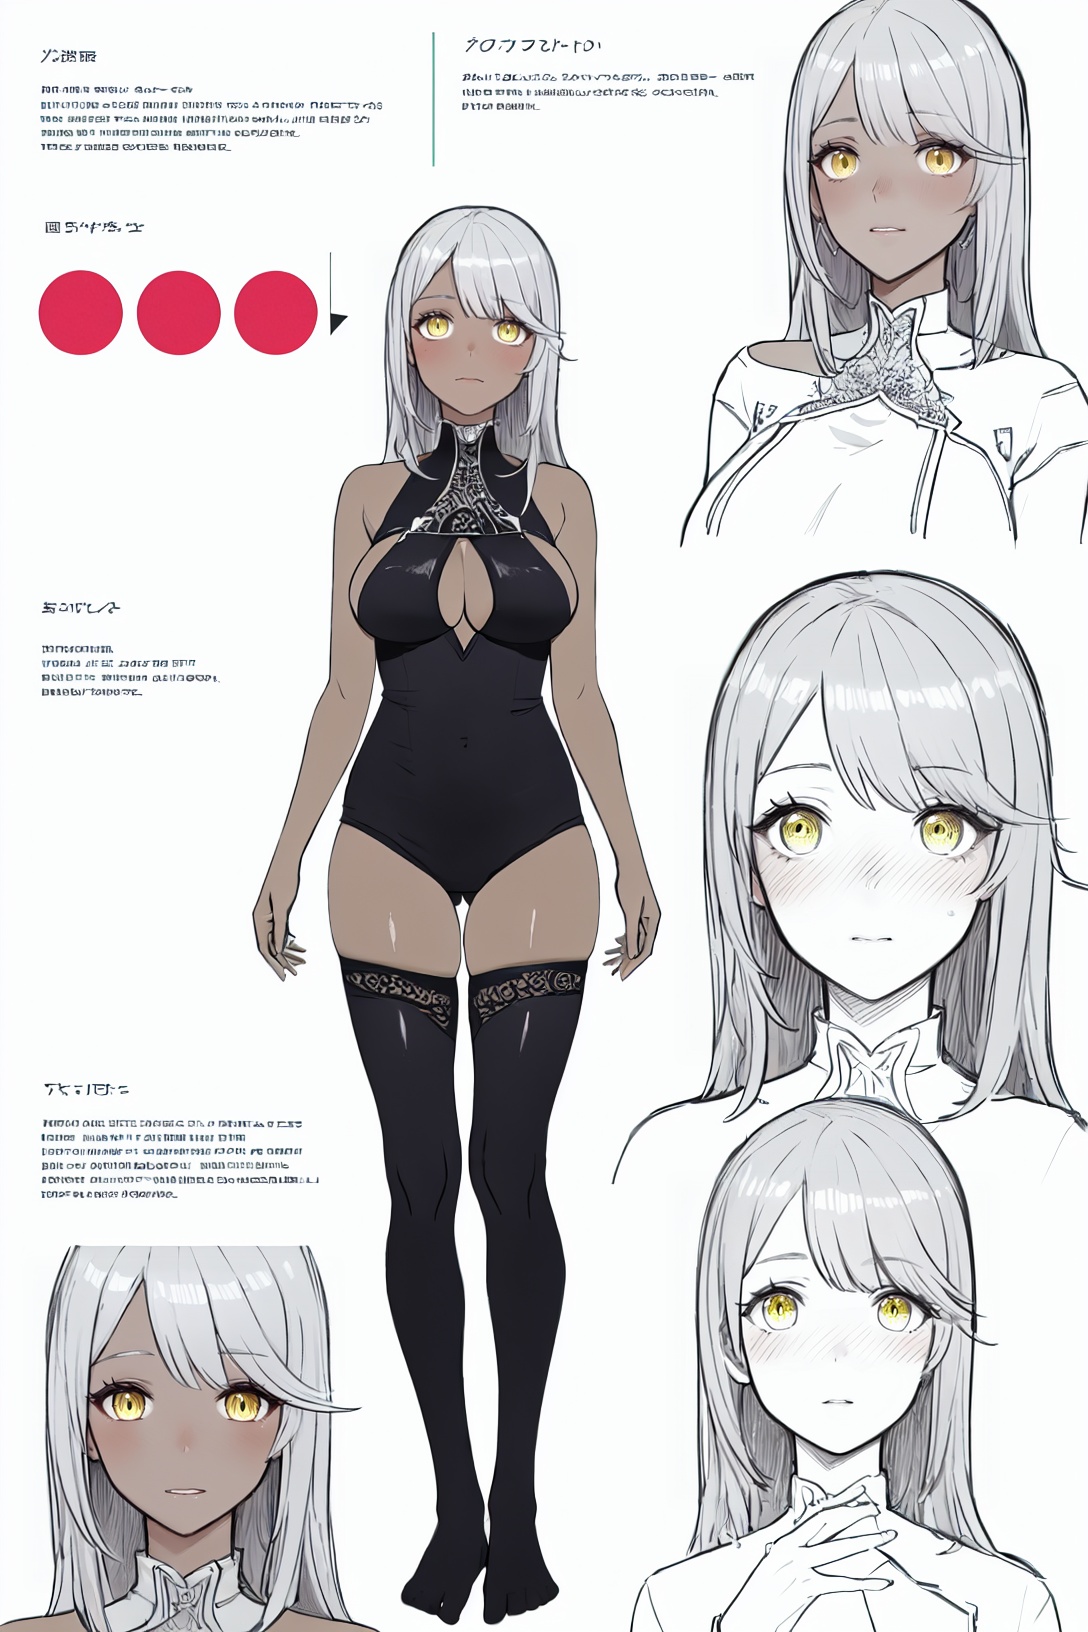 multiple views, pencil sketch, (sketch:1.25), (loli), ((no shoes)), shy, best quality, graphite \\(medium\\), ske, gradient, rainbow, note, Line draft, highres, absurdres, (ultra-detailed:1.1), (illustration:1.1), (infographic:1.2), pajamas, (all clothes configuration:1.15), (solo), perfectly drawn hands, standing, cohesive background, paper, action, (character design:1.1), <lora:Clothes wth Holes for Boobs and Nipples - Clothes Pack (Lingerie, dress, latex, and more...) 服装:0.8>, clothesholesboobs, thighhighs, nipples cutout clothes, nipples, <lora:Carol-v100-000019:0.8:lbw=OUTALL>, Carol, 1girl, dark-skinned female, dark skin, yellow eyes, grey hair, body blush, public hair, hairy, <lora:Anime Lineart ,Manga-like (线稿,線画,マンガ風,漫画风) Style:0.4>, <lora:sketchy:0.2>, [[delicate fingers and hands:0.55]::0.85], (detail fingers), (empty hands:1.1), bare_hands, (beautiful_face), ((intricate_detail)), (revealing clothes:1.2), clear face, ((finely_detailed)), fine_fabric_emphasis, ((glossy)), 